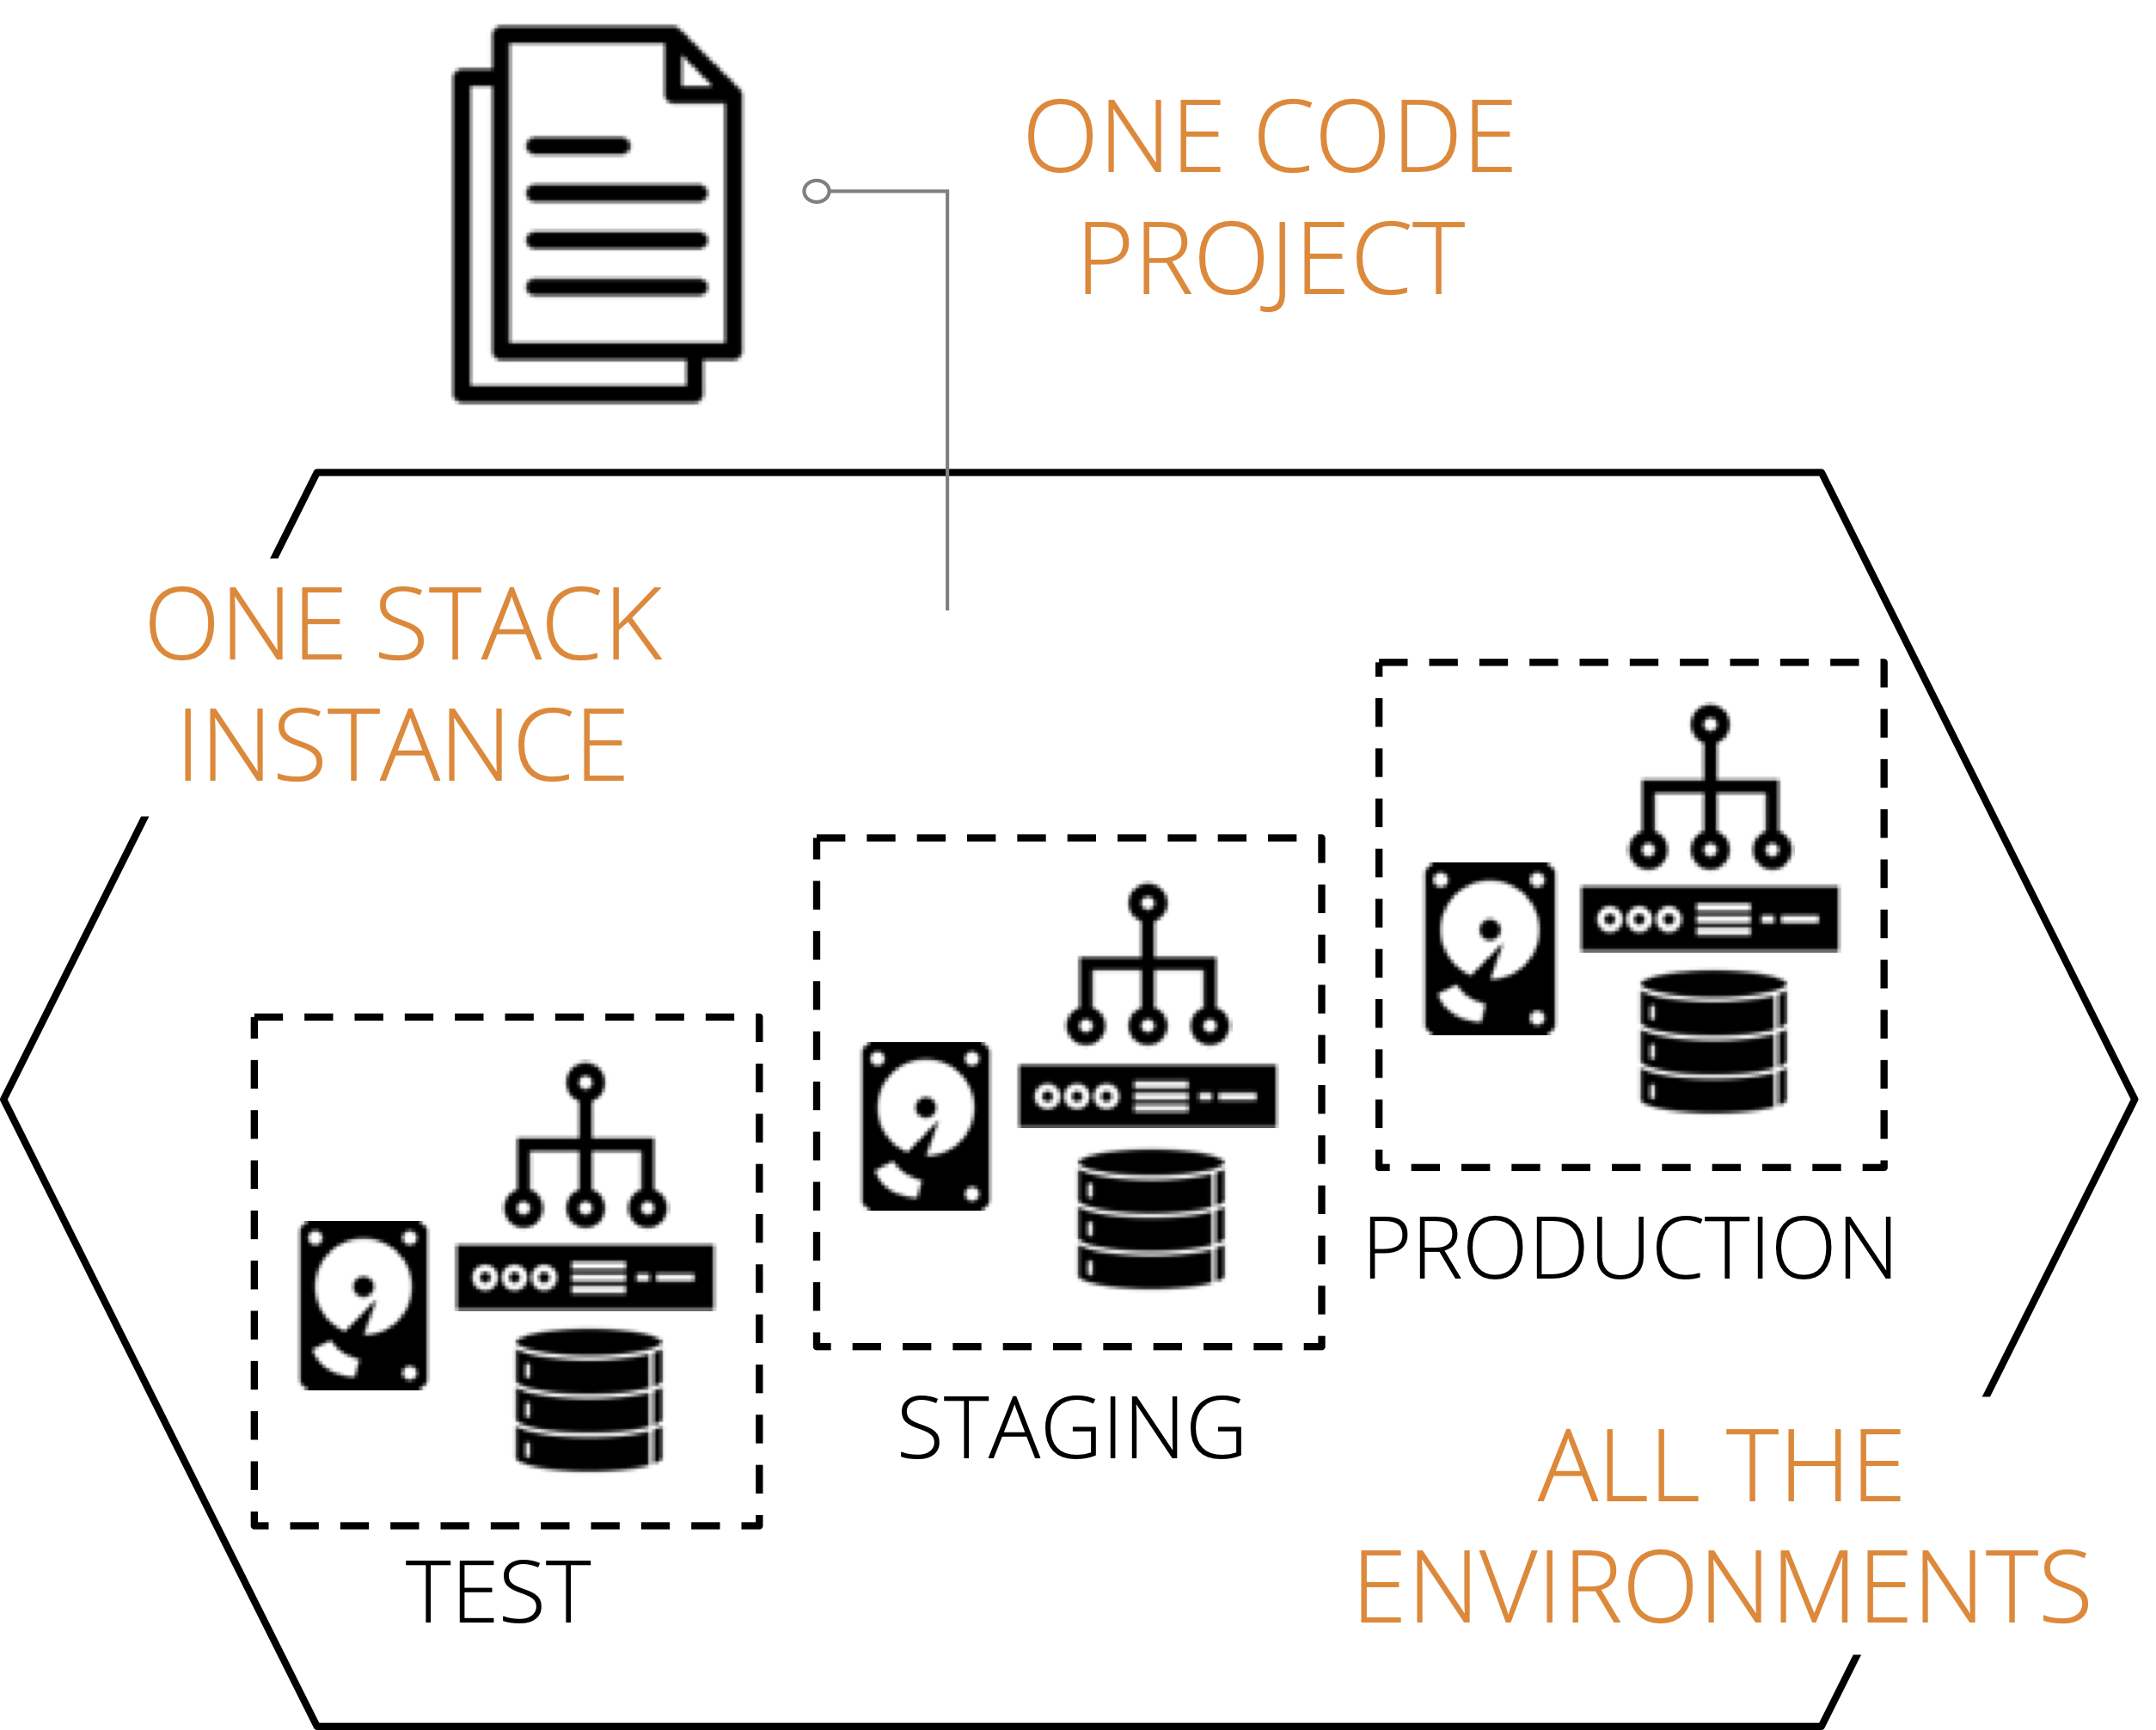 A multiple-environment stack manages the infrastructure for multiple environments as a single stack instance.